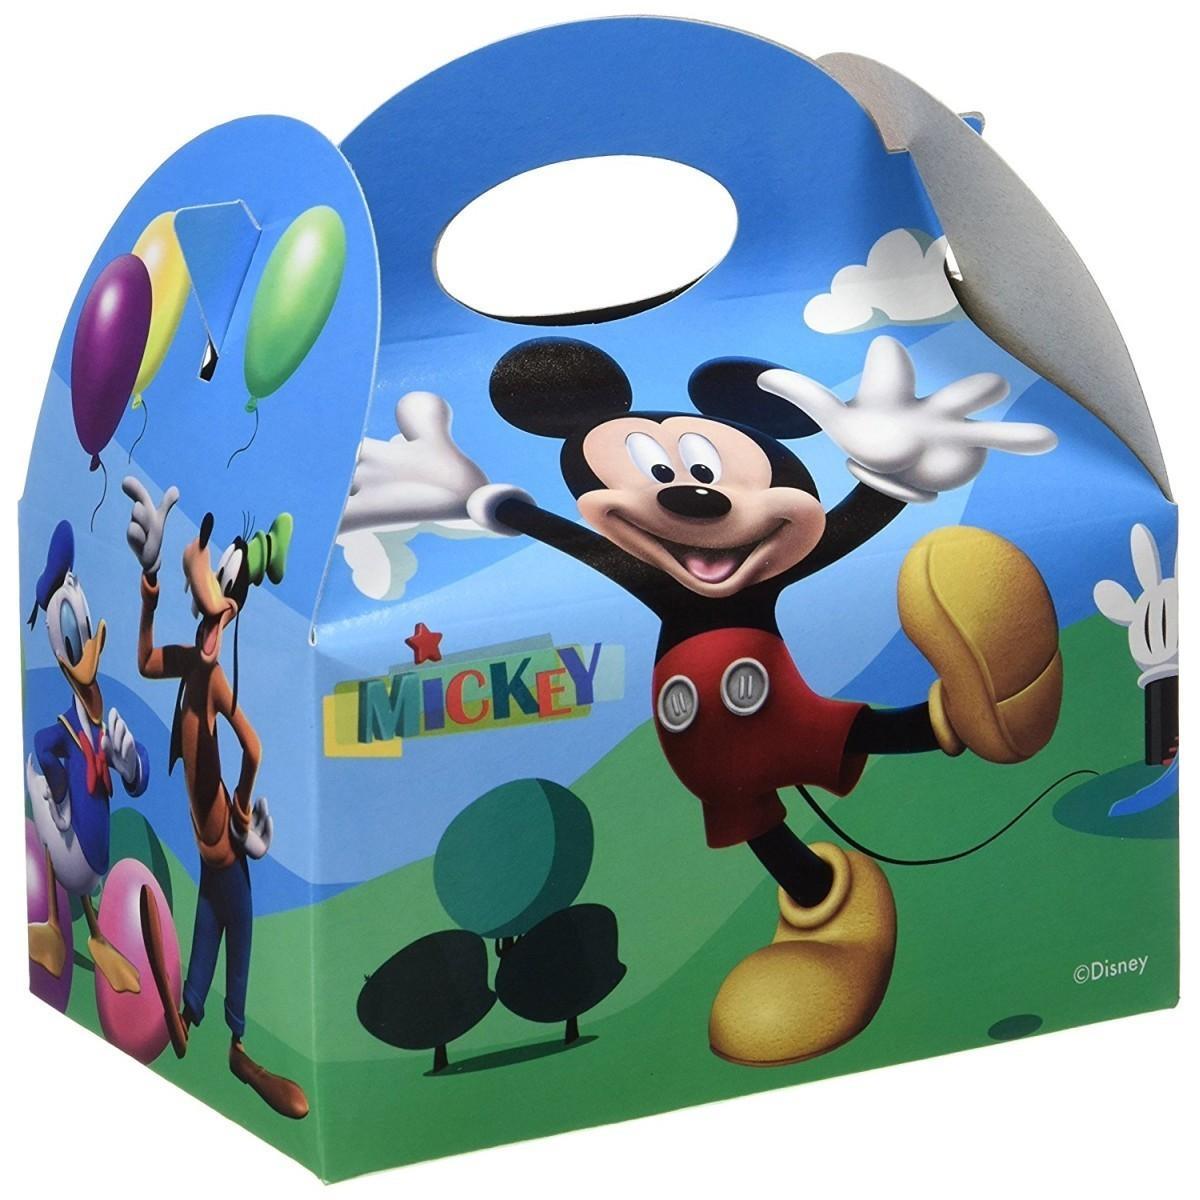 Disney Mickey Mouse Gift Box (Multicoloured) (One Size)